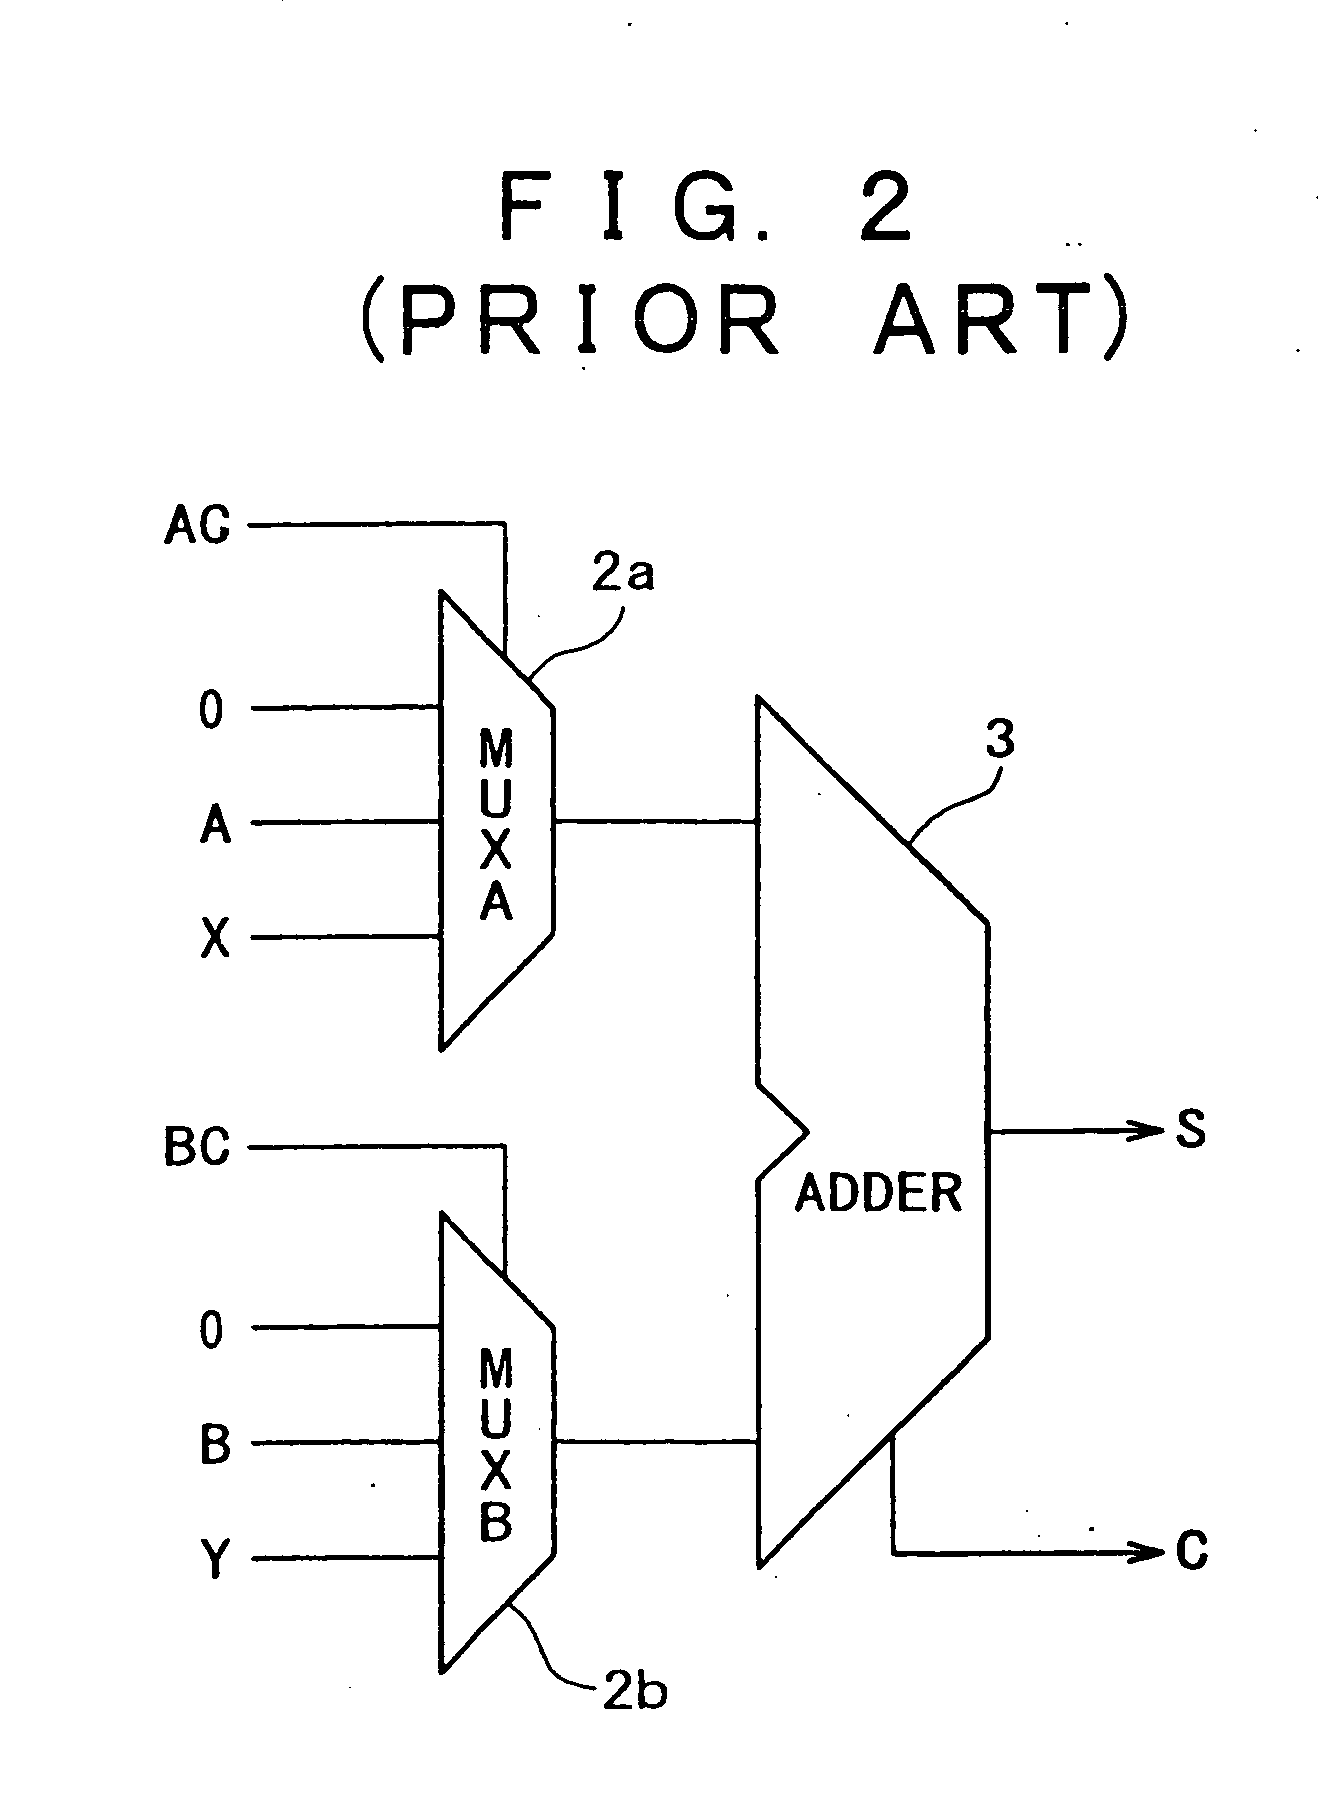 Logic circuit whose power switch is quickly turned on and off